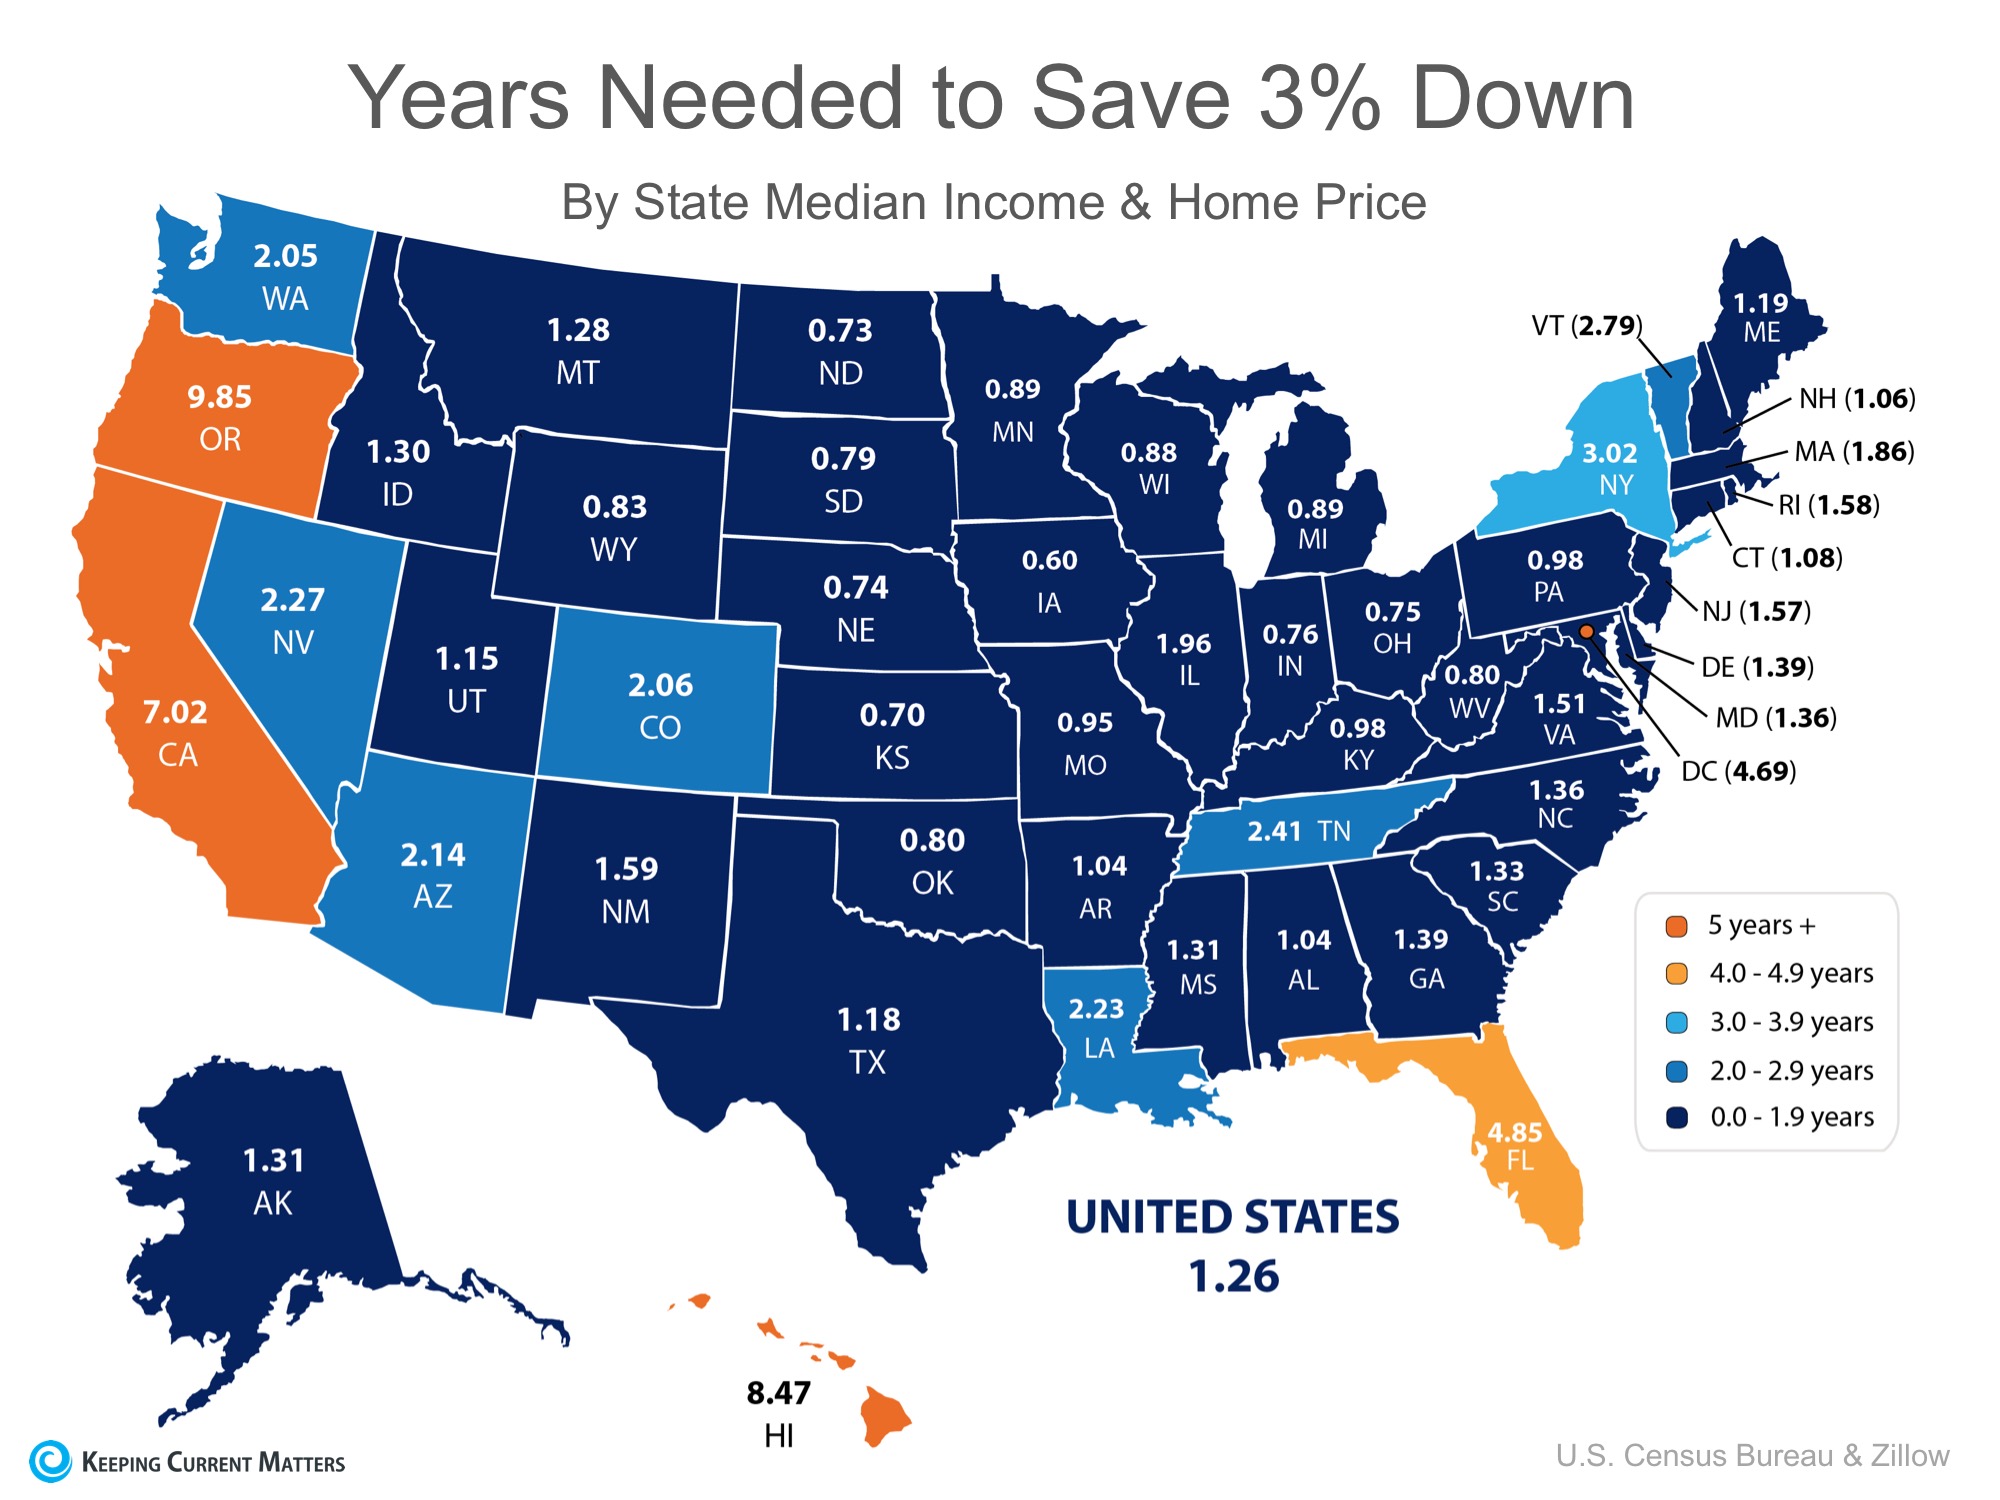 How Fast Can You Save for a Down Payment? | Keeping Current Matters